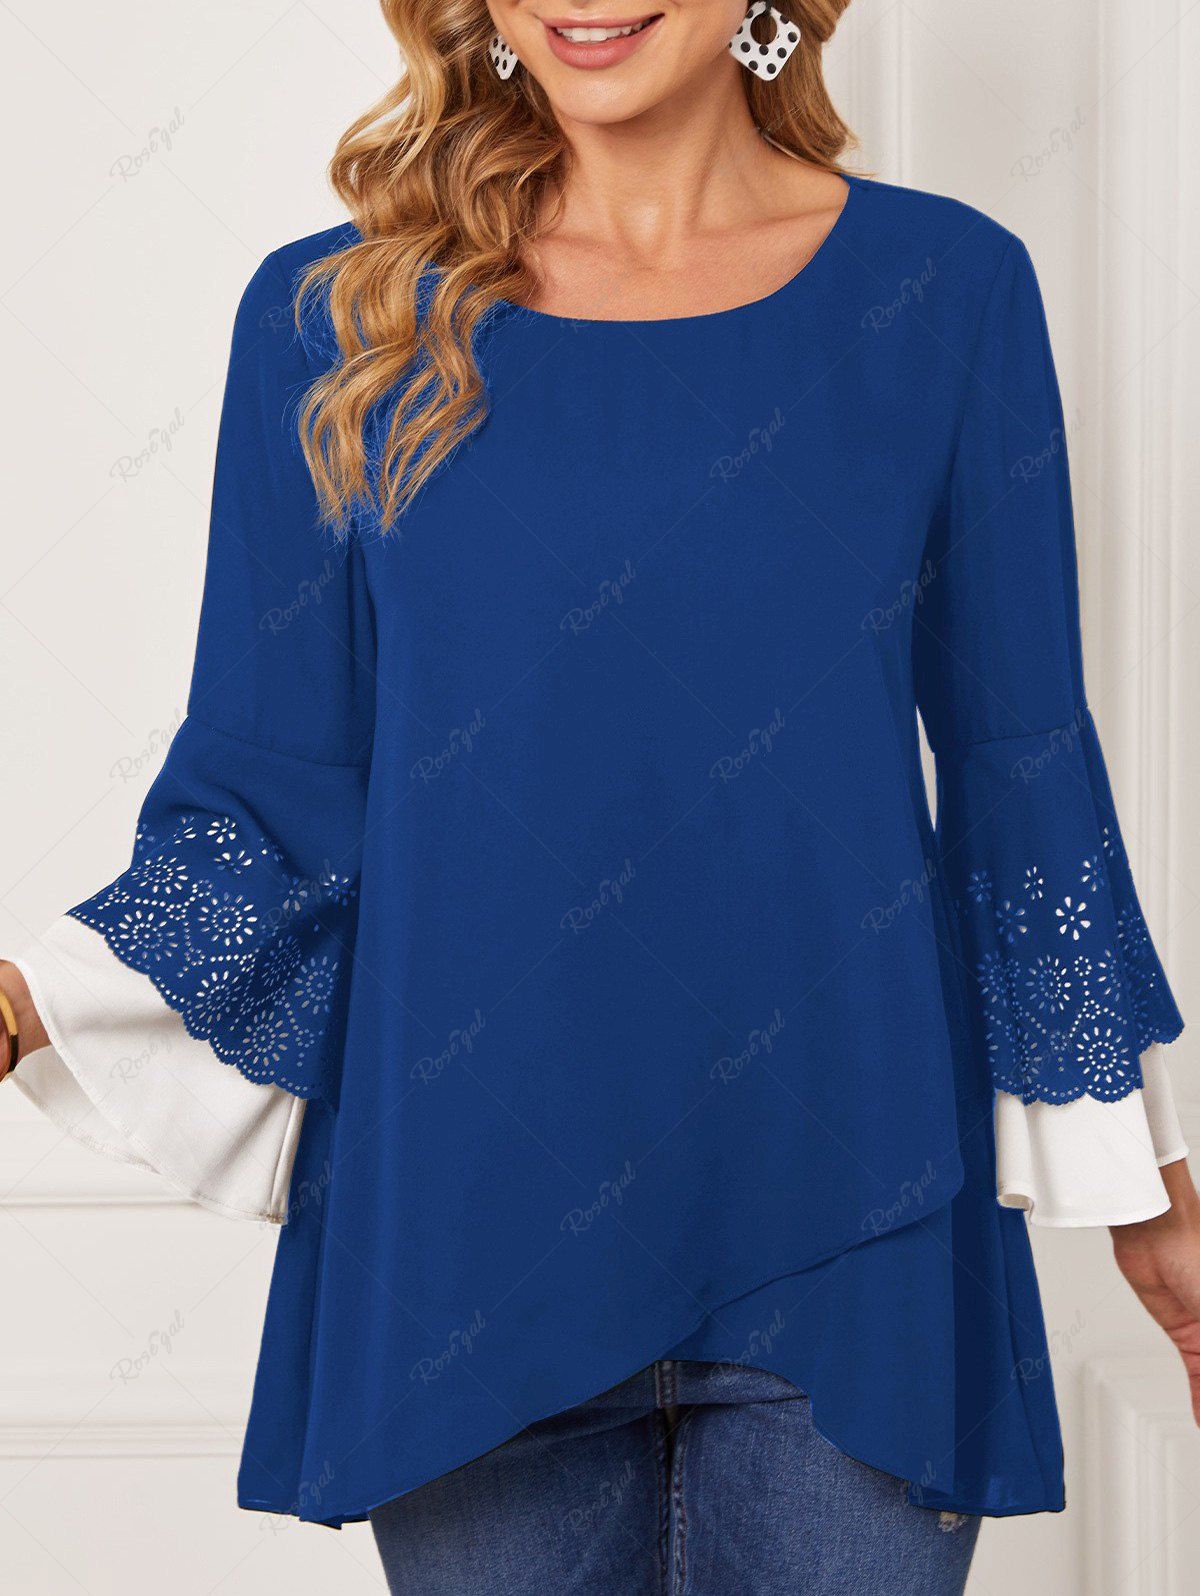 Buy Plus Size Tulip Hem Hollow Out Layered Sleeves T-shirt  